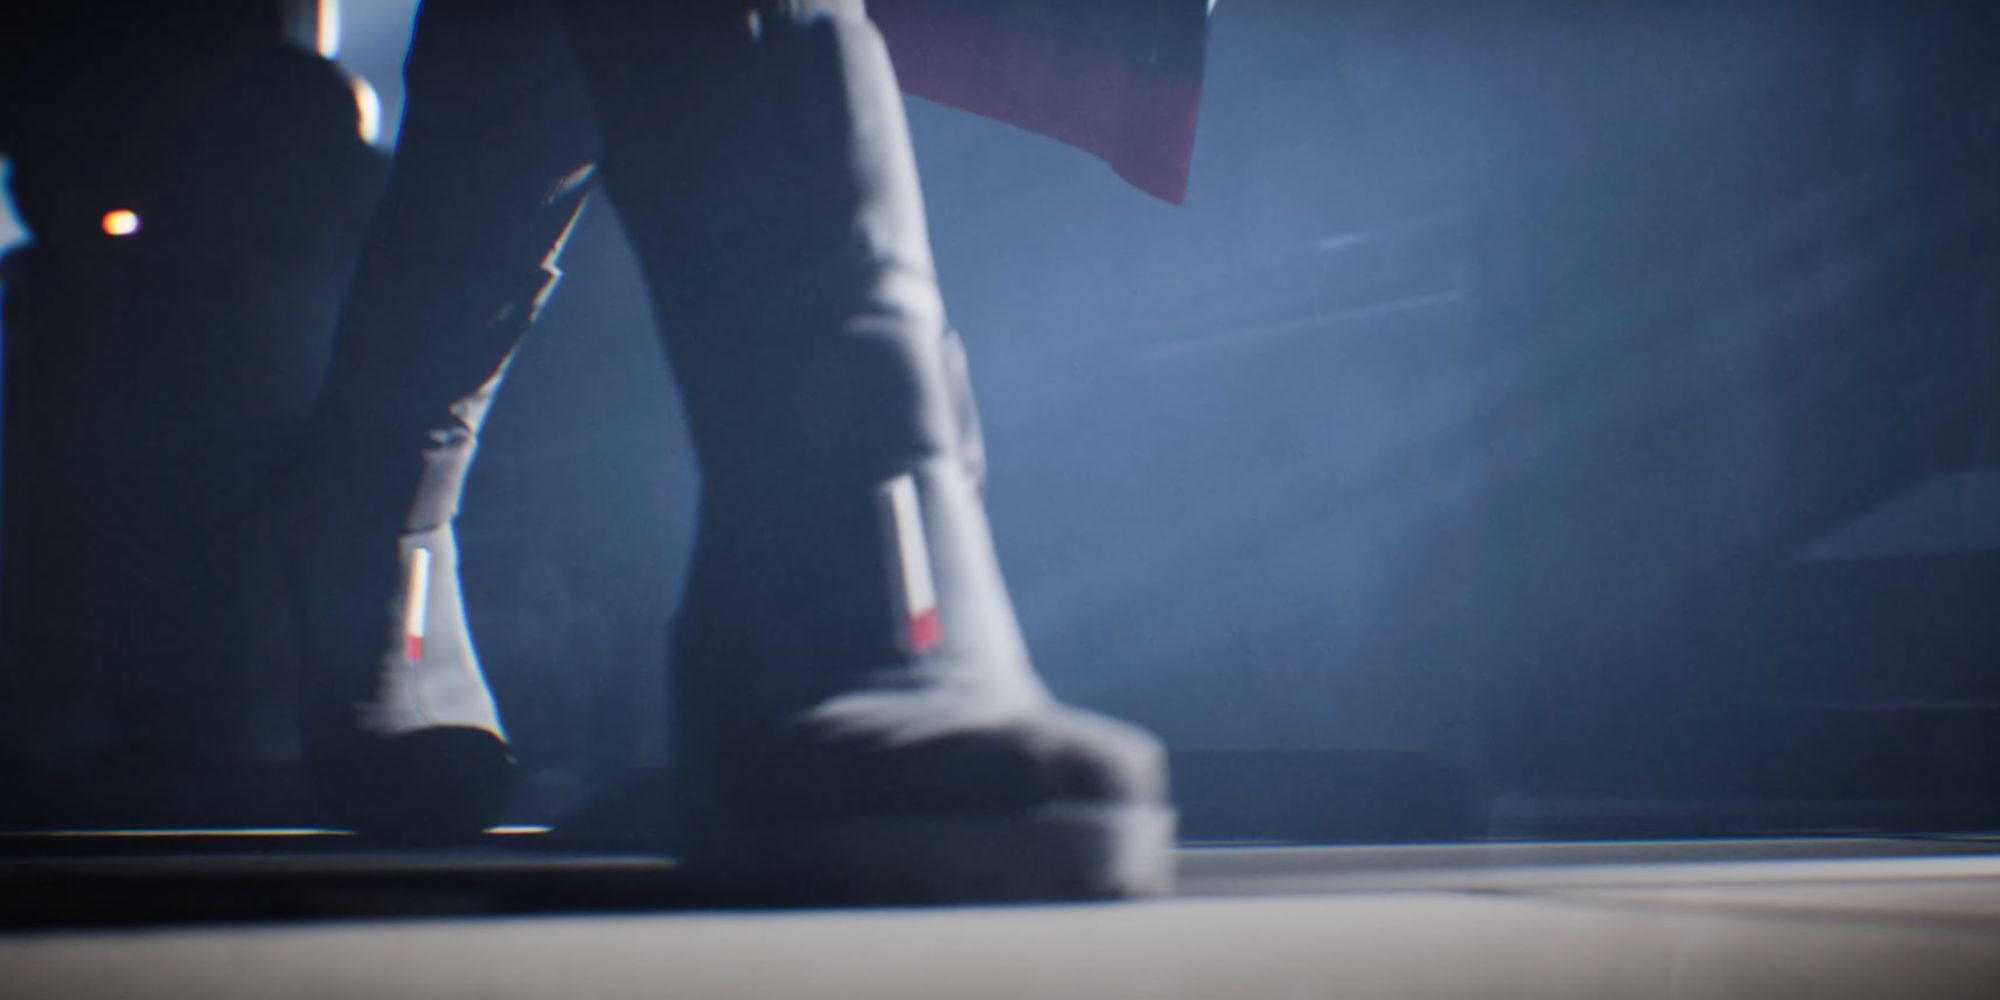 A screenshot from a teaser for the next Mass Effect game. It shows someone's boots, walking down a hallway